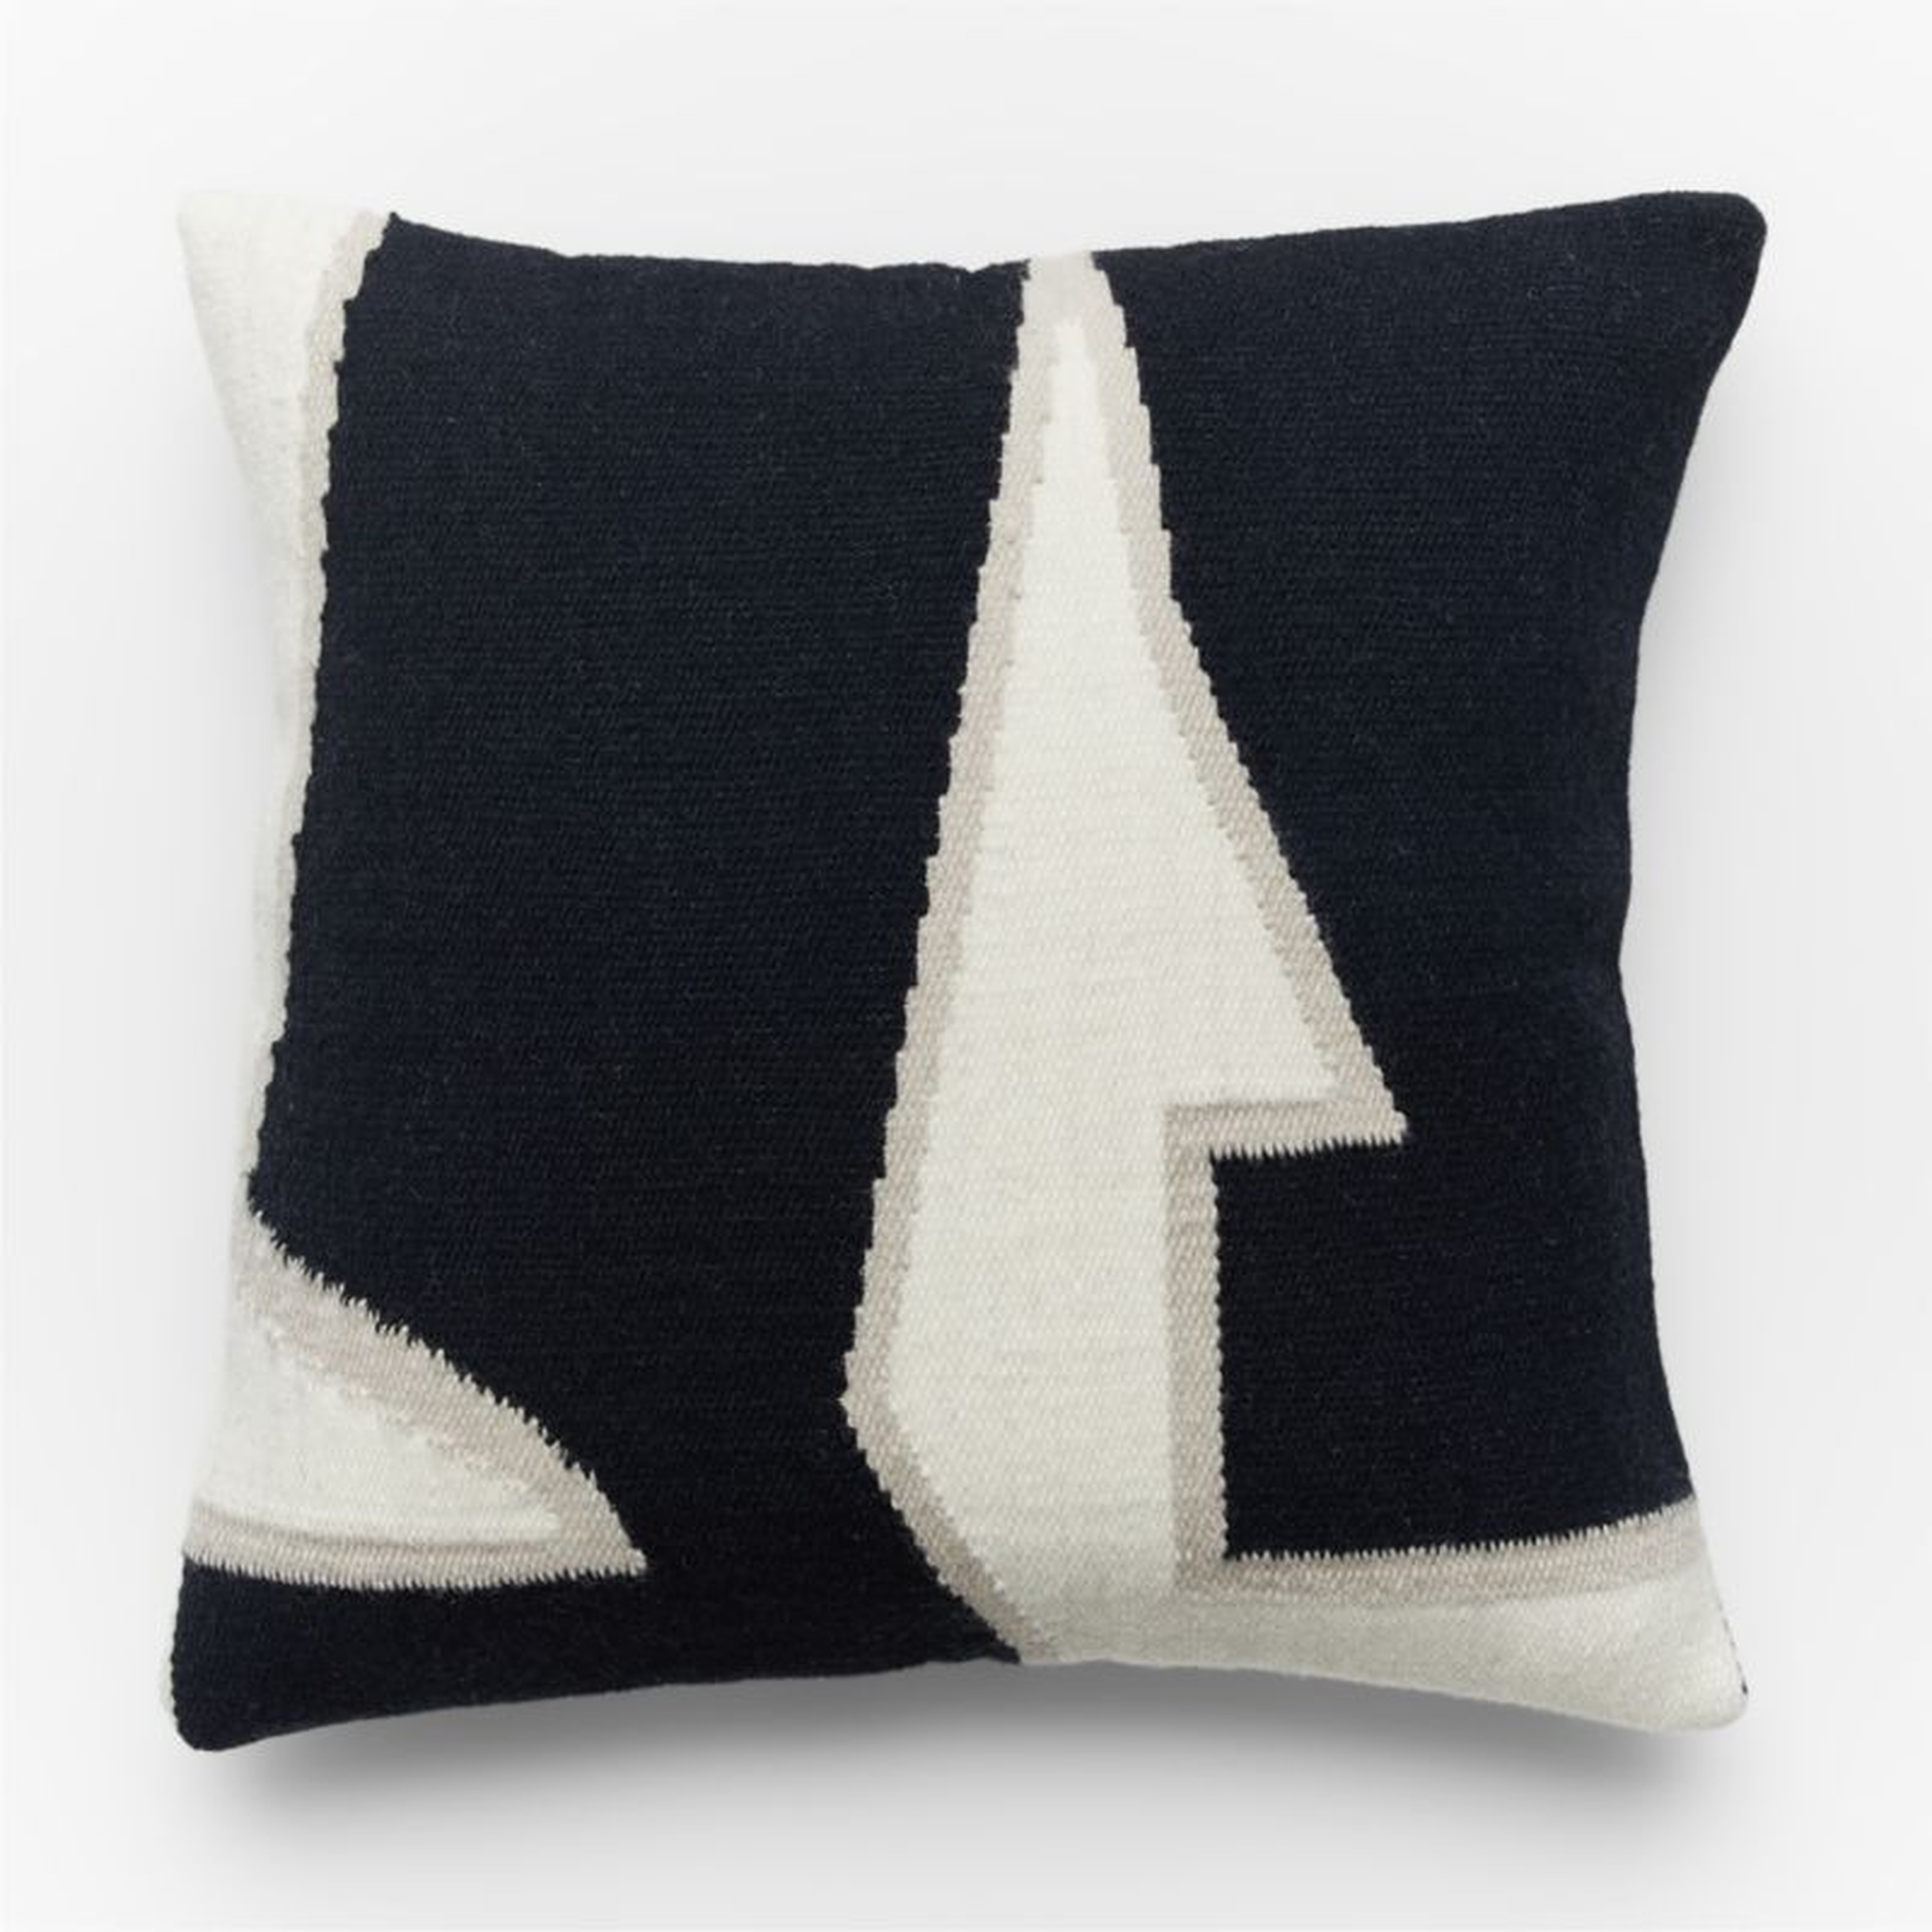 Sandro Black and White Throw Pillow with Feather-Down Insert 20" - CB2